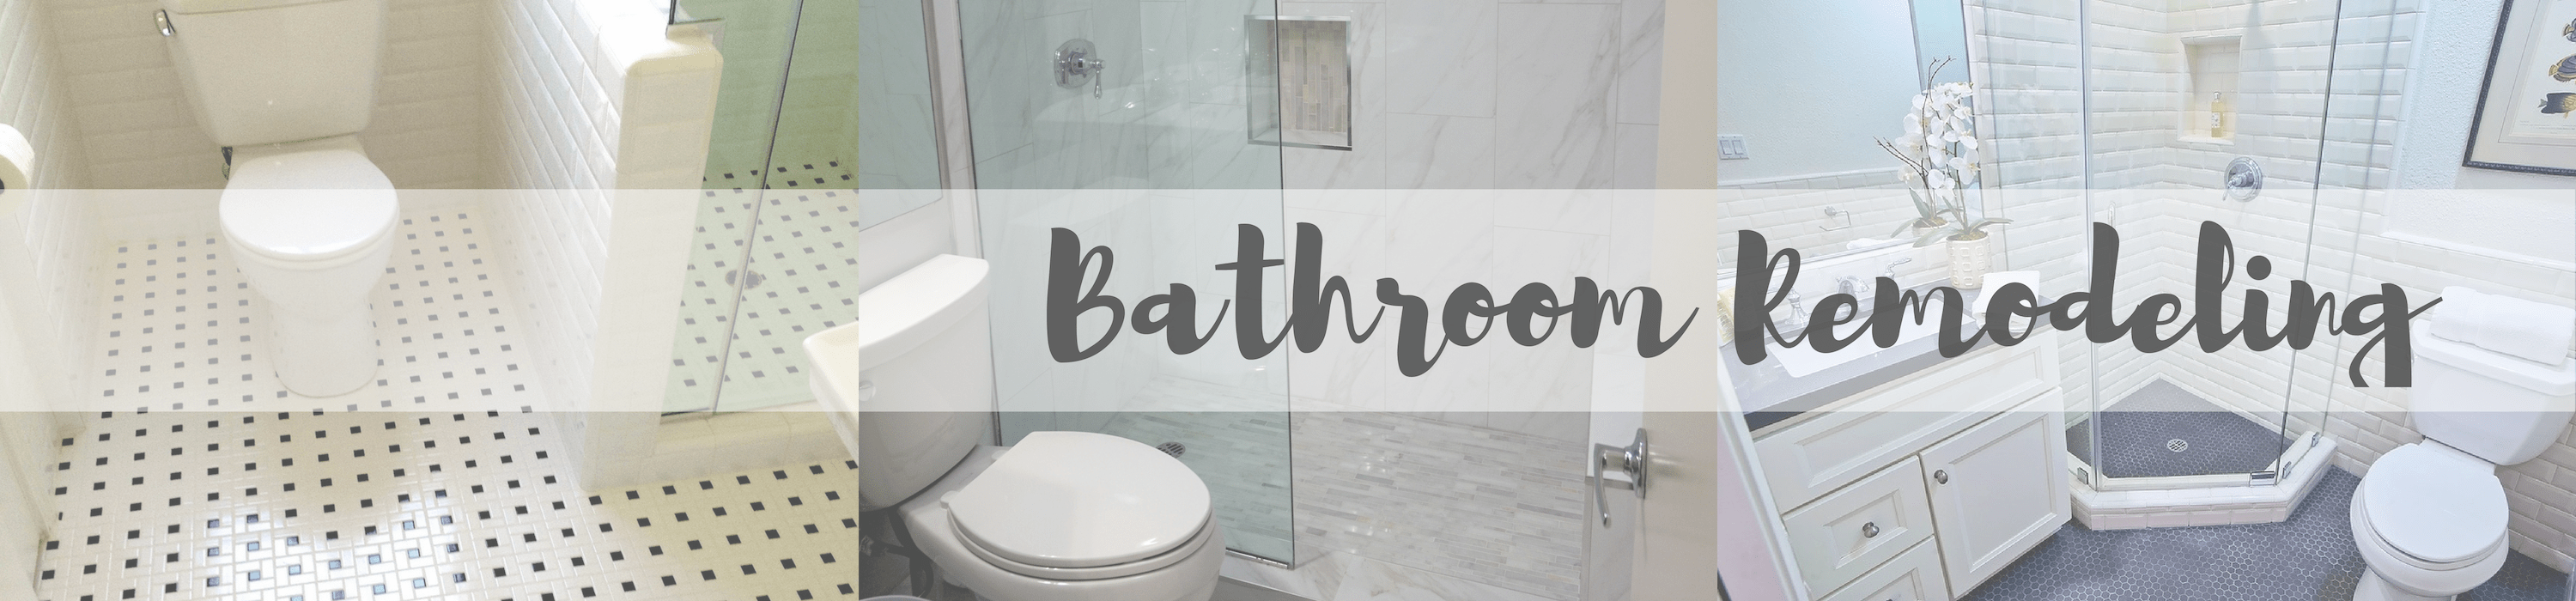 DHE Best Construction Services 3 - Bathroom Remodeling